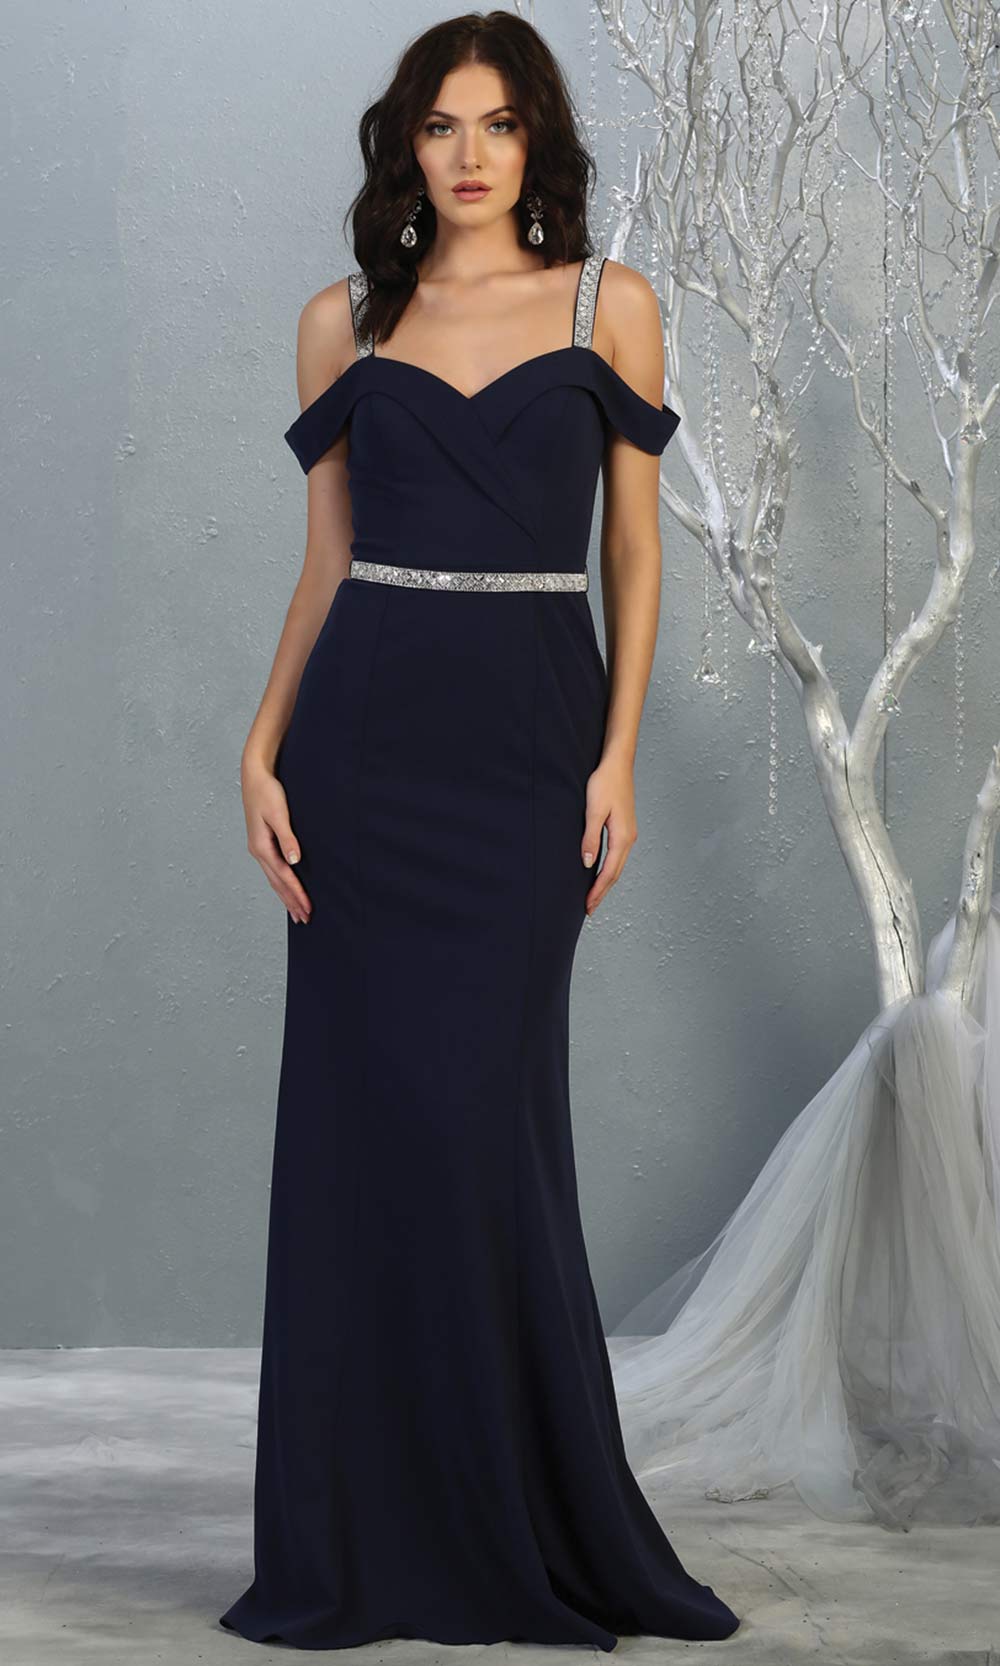 Mayqueen MQ1765 long navy blue fitted dress with rhinestone belt and cold shoulder neckline. This dark blue sleek & sexy simple dress is perfect for bridesmaids, gala, formal wedding guest dress, evening party dress. Plus sizes available.jpg